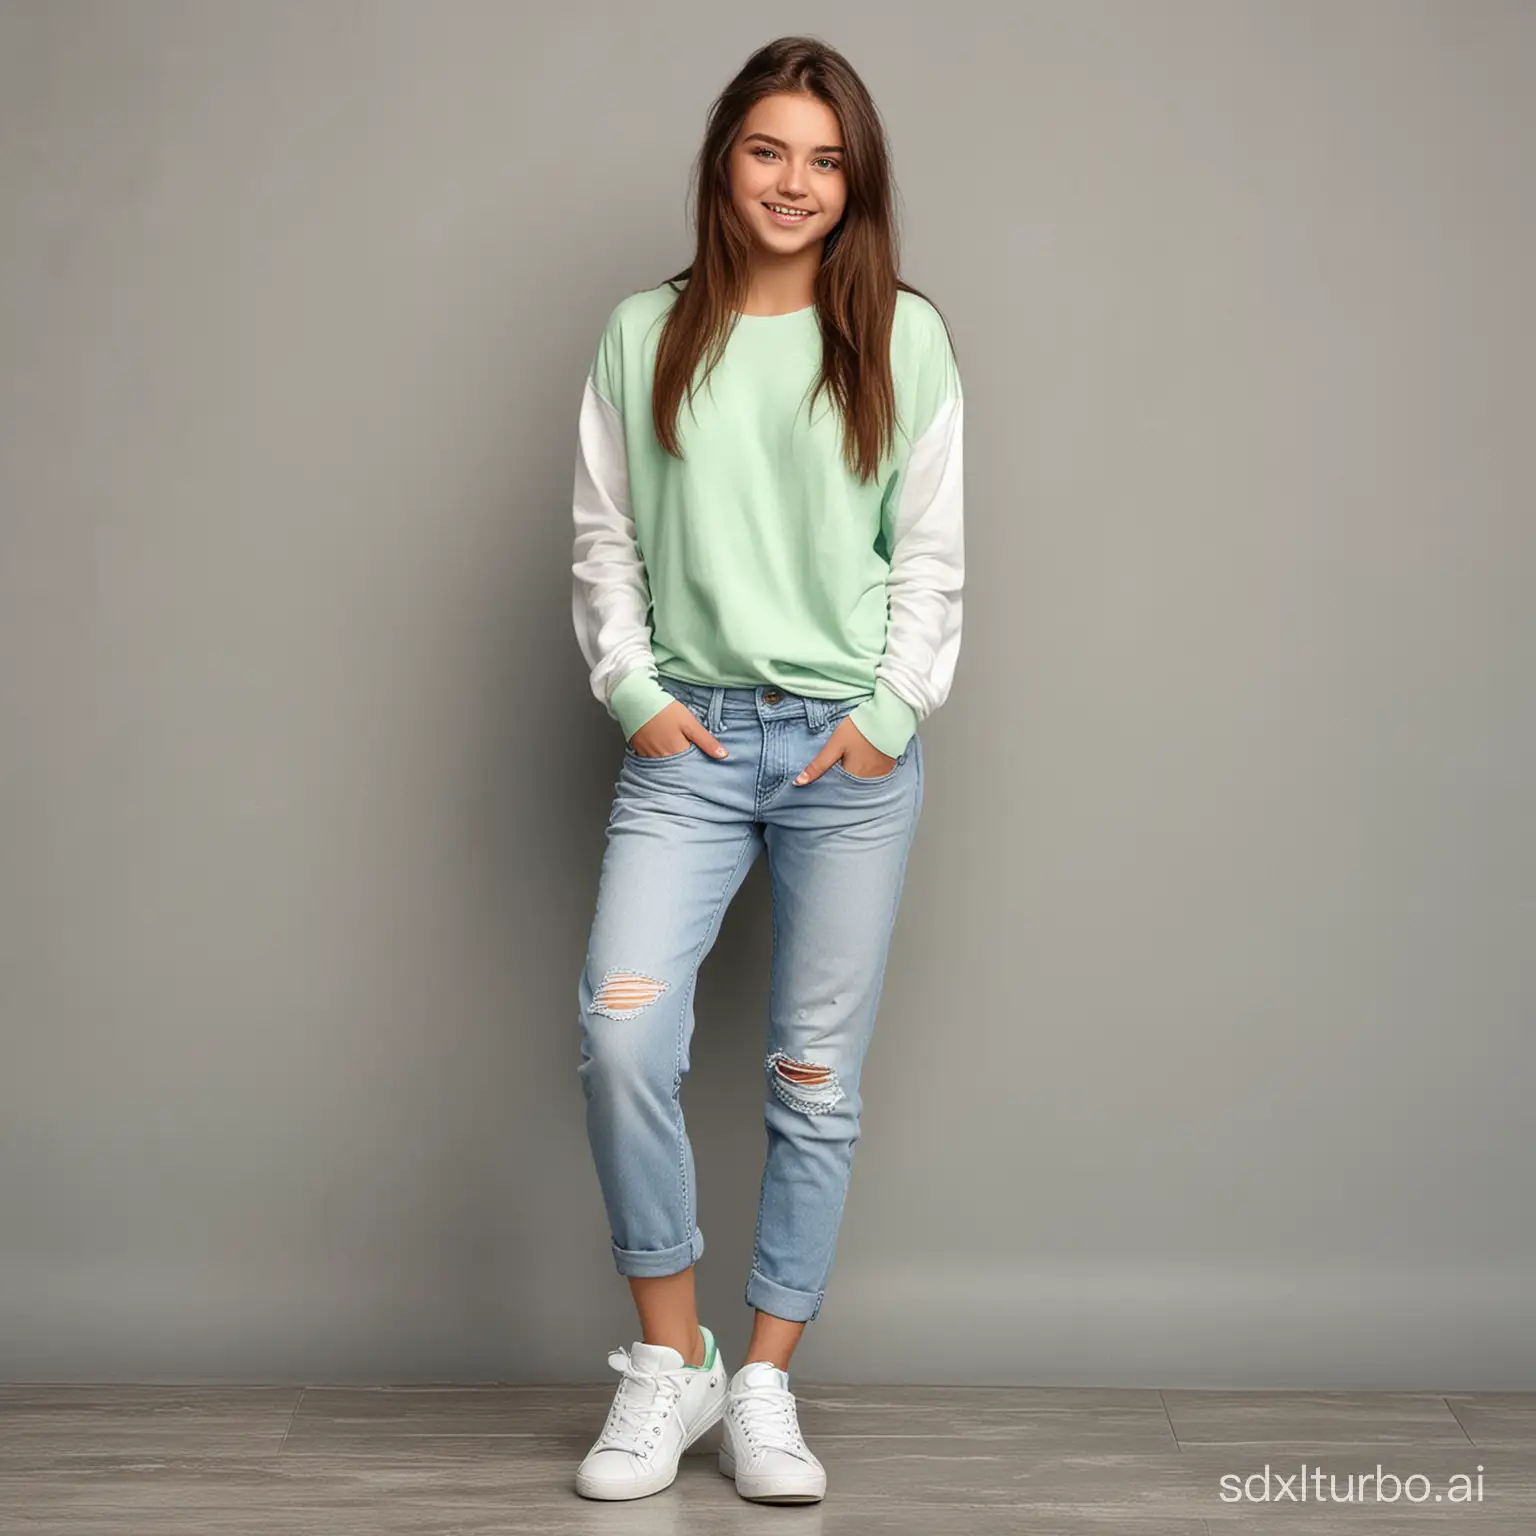 Radiant-Teenage-Girl-with-Green-Eyes-Smiling-in-White-Sneakers